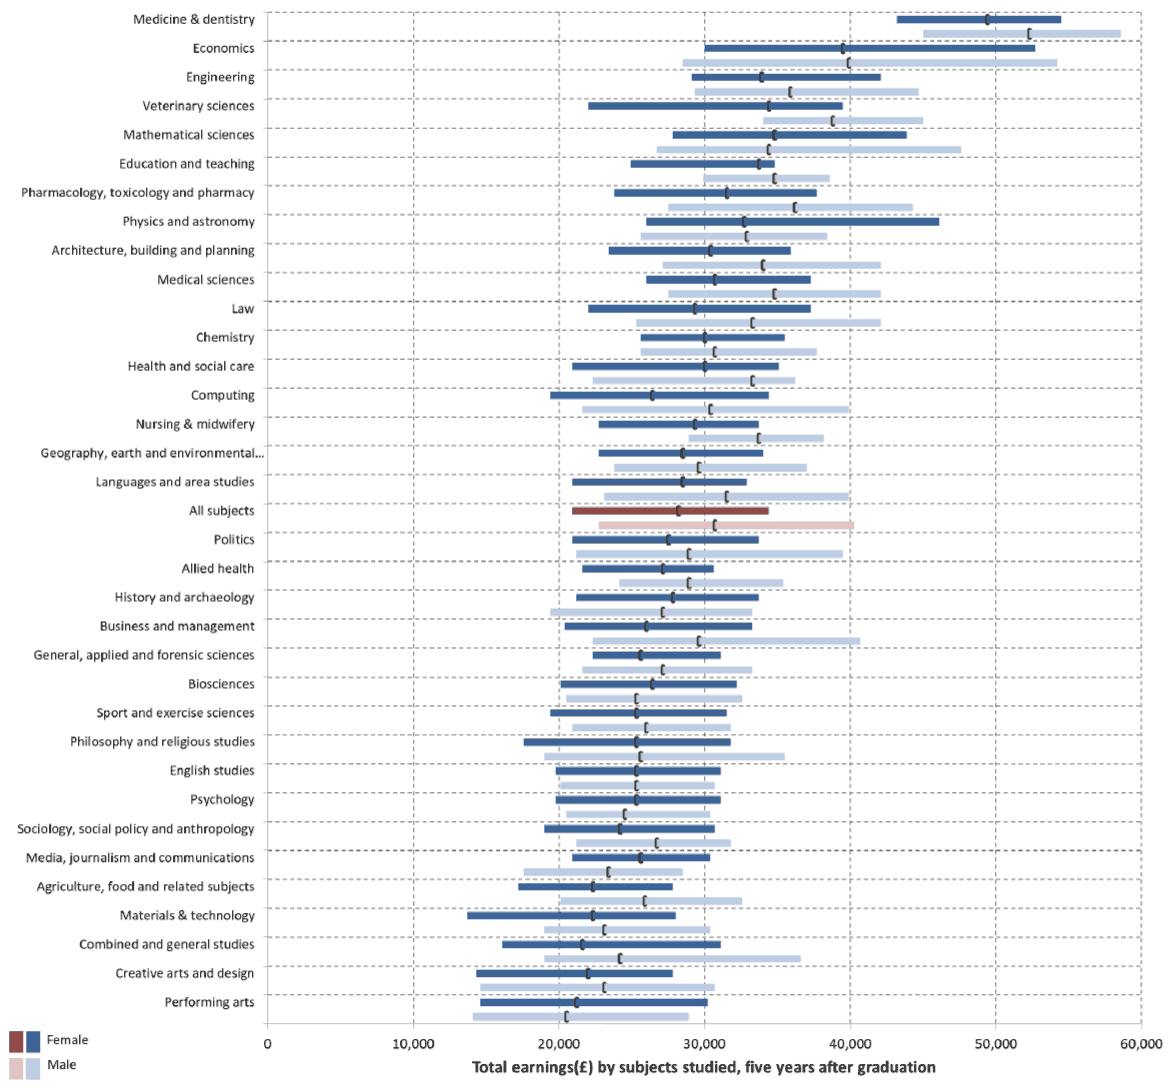 A graphic provides a comparison of distributions of total earnings by subject area, five years after graduation, for males and females from Scottish Higher Education Institutions. All figures in the graphic relate to median earnings in 2019 to 2020 tax year of UK domiciled first degree graduates in the 2013 to 2014 academic year, which is five years after graduation. The distribution is shown by the lower quartile, median, and upper quartile for each subject area.